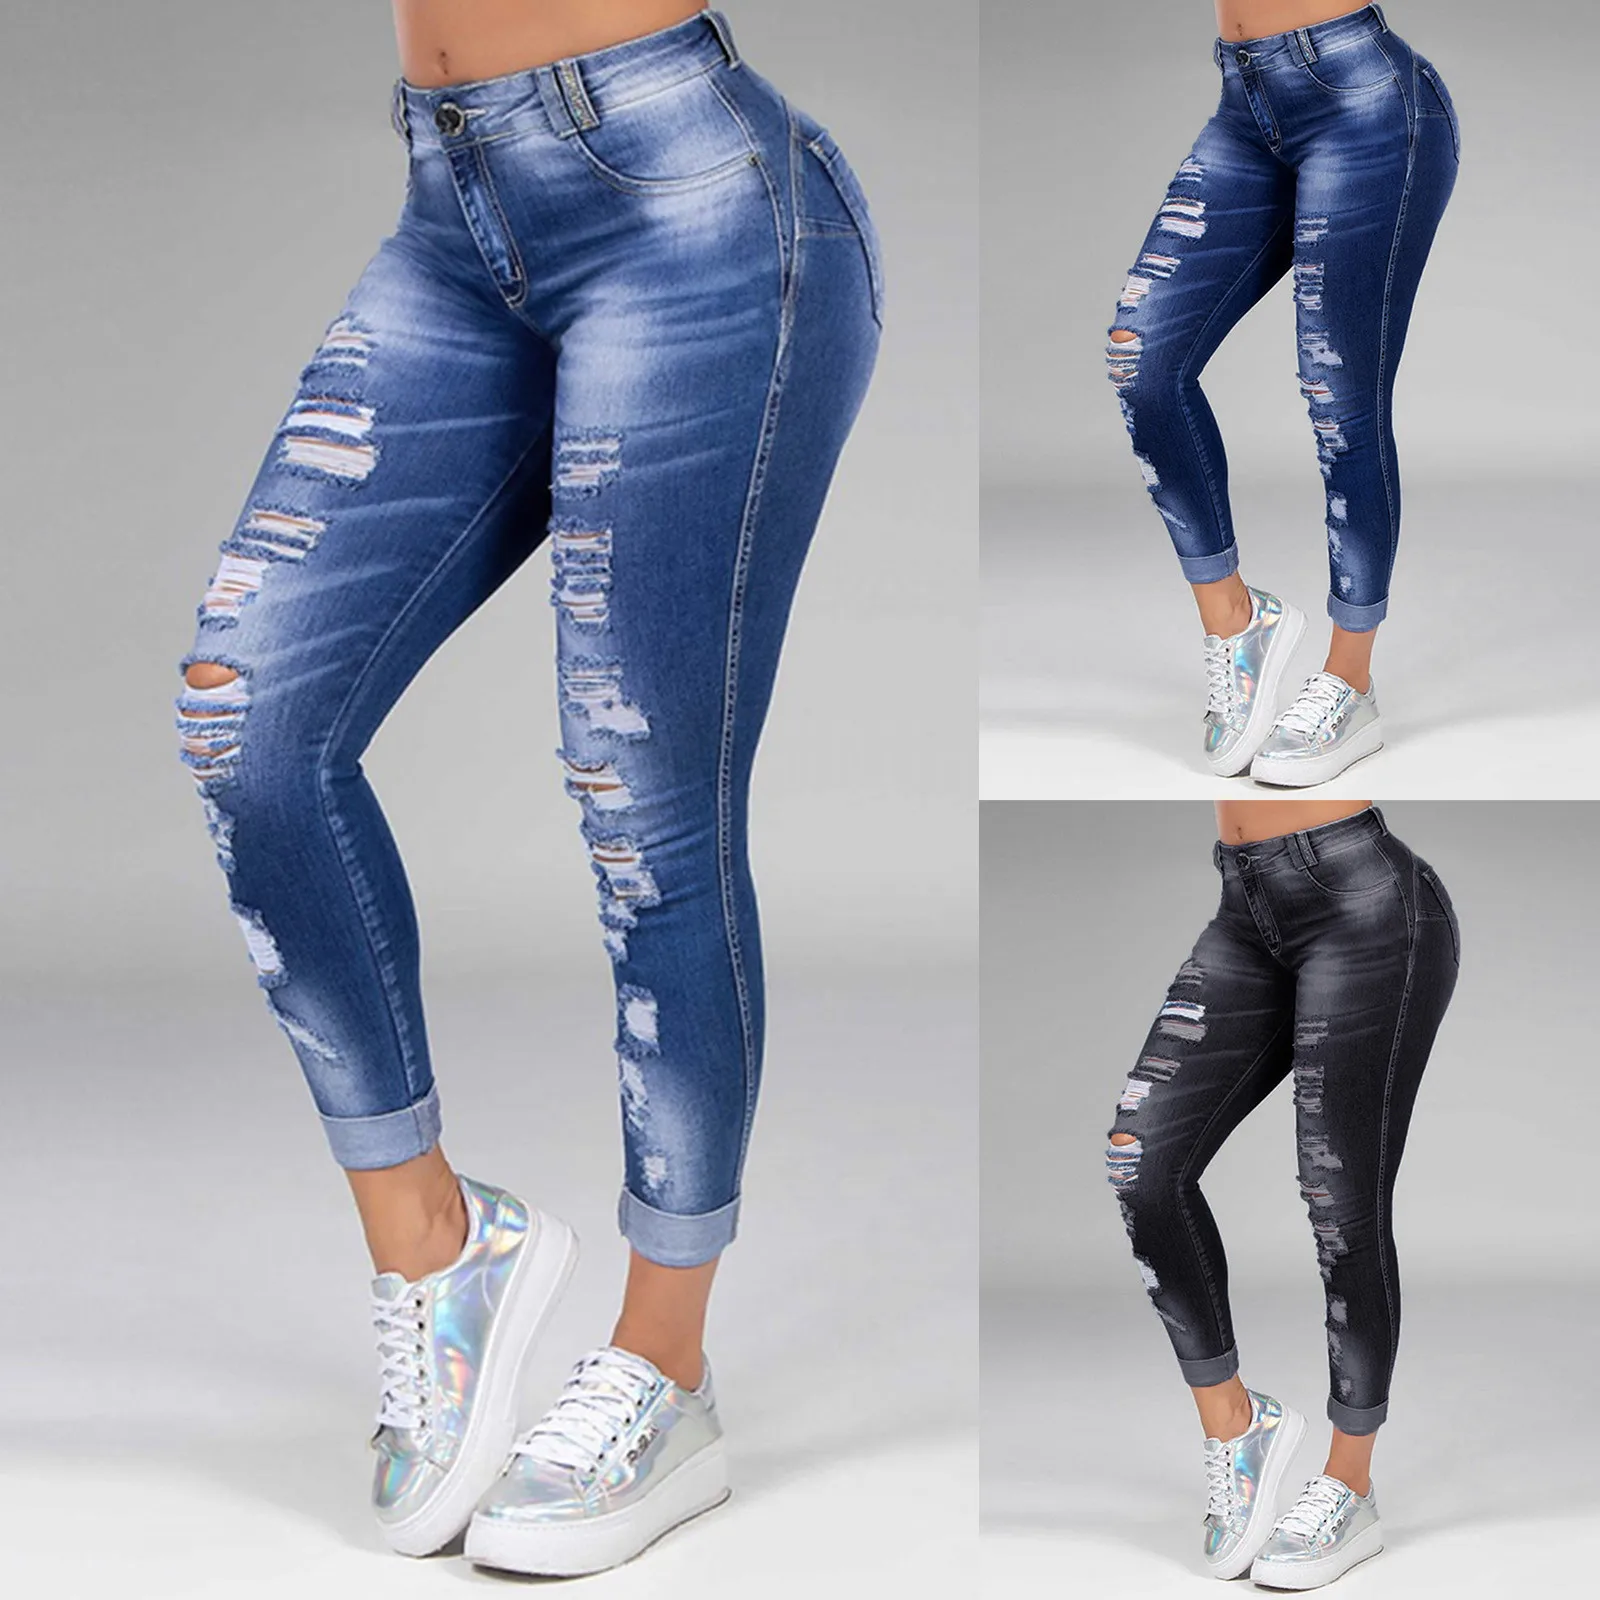 

Women Pants High Stretch Perforated Plus Size Skinny Tube Trousers High Street Ripped Fashion Flare Jeans S Full Length Jeans